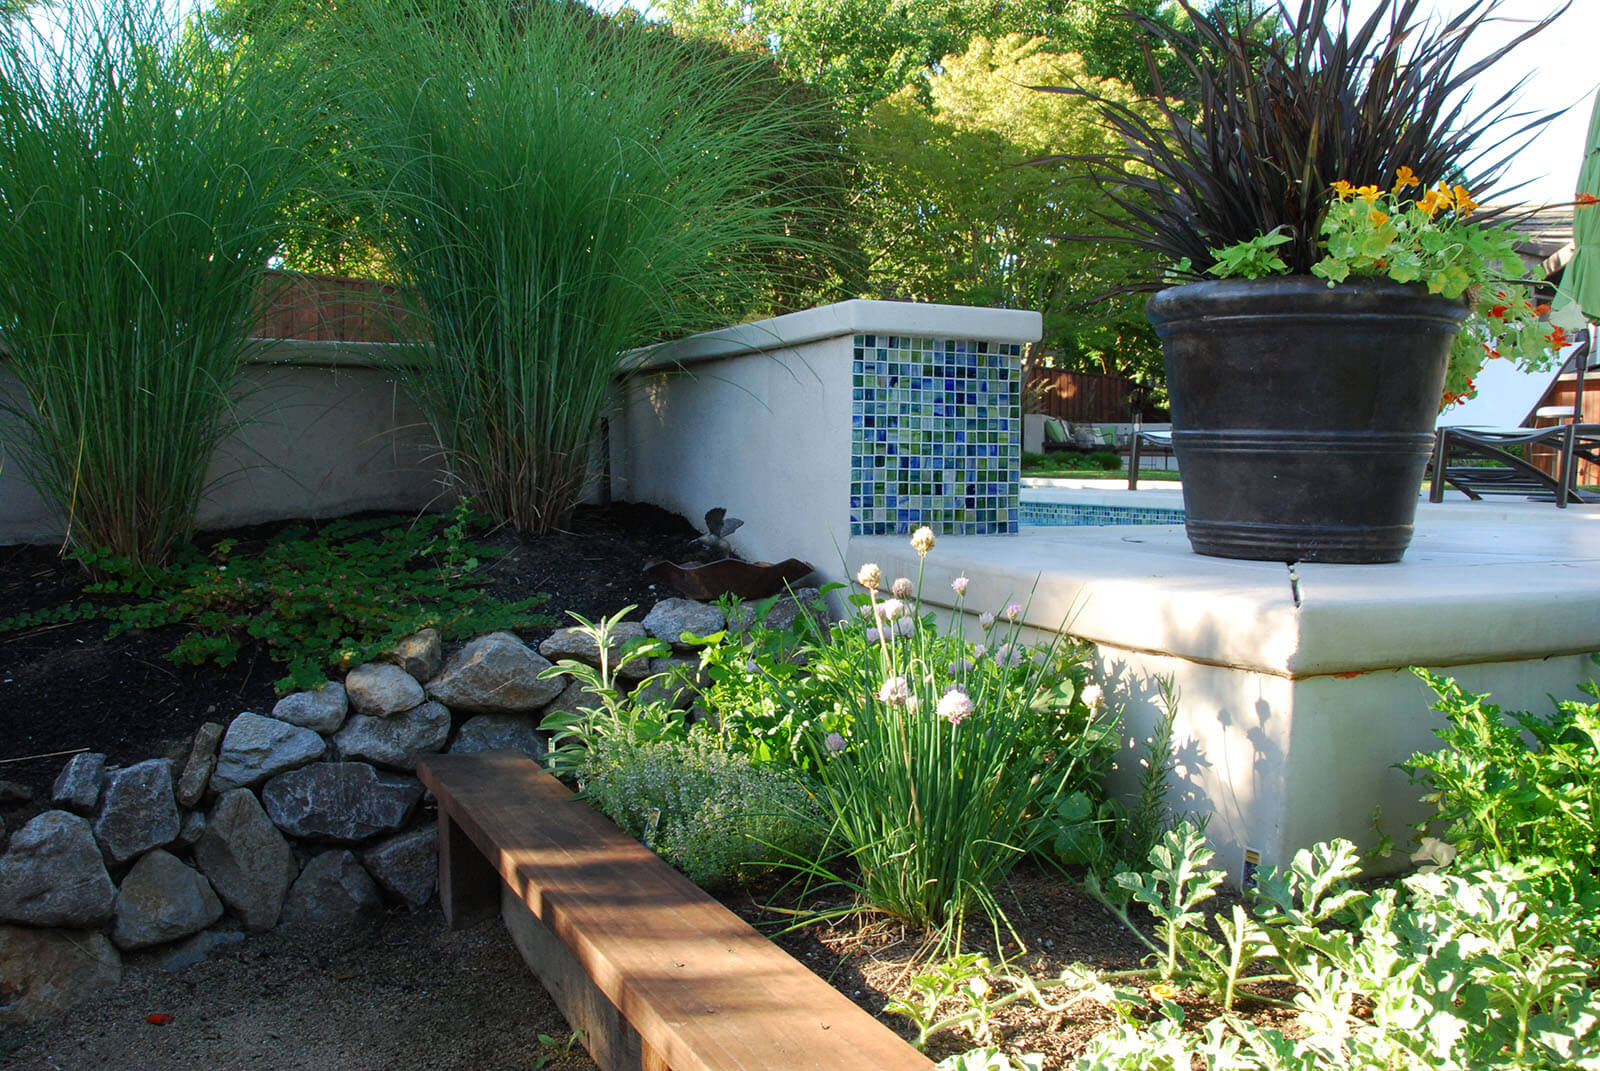 Staged planting area with wooden, stone, and potted beds